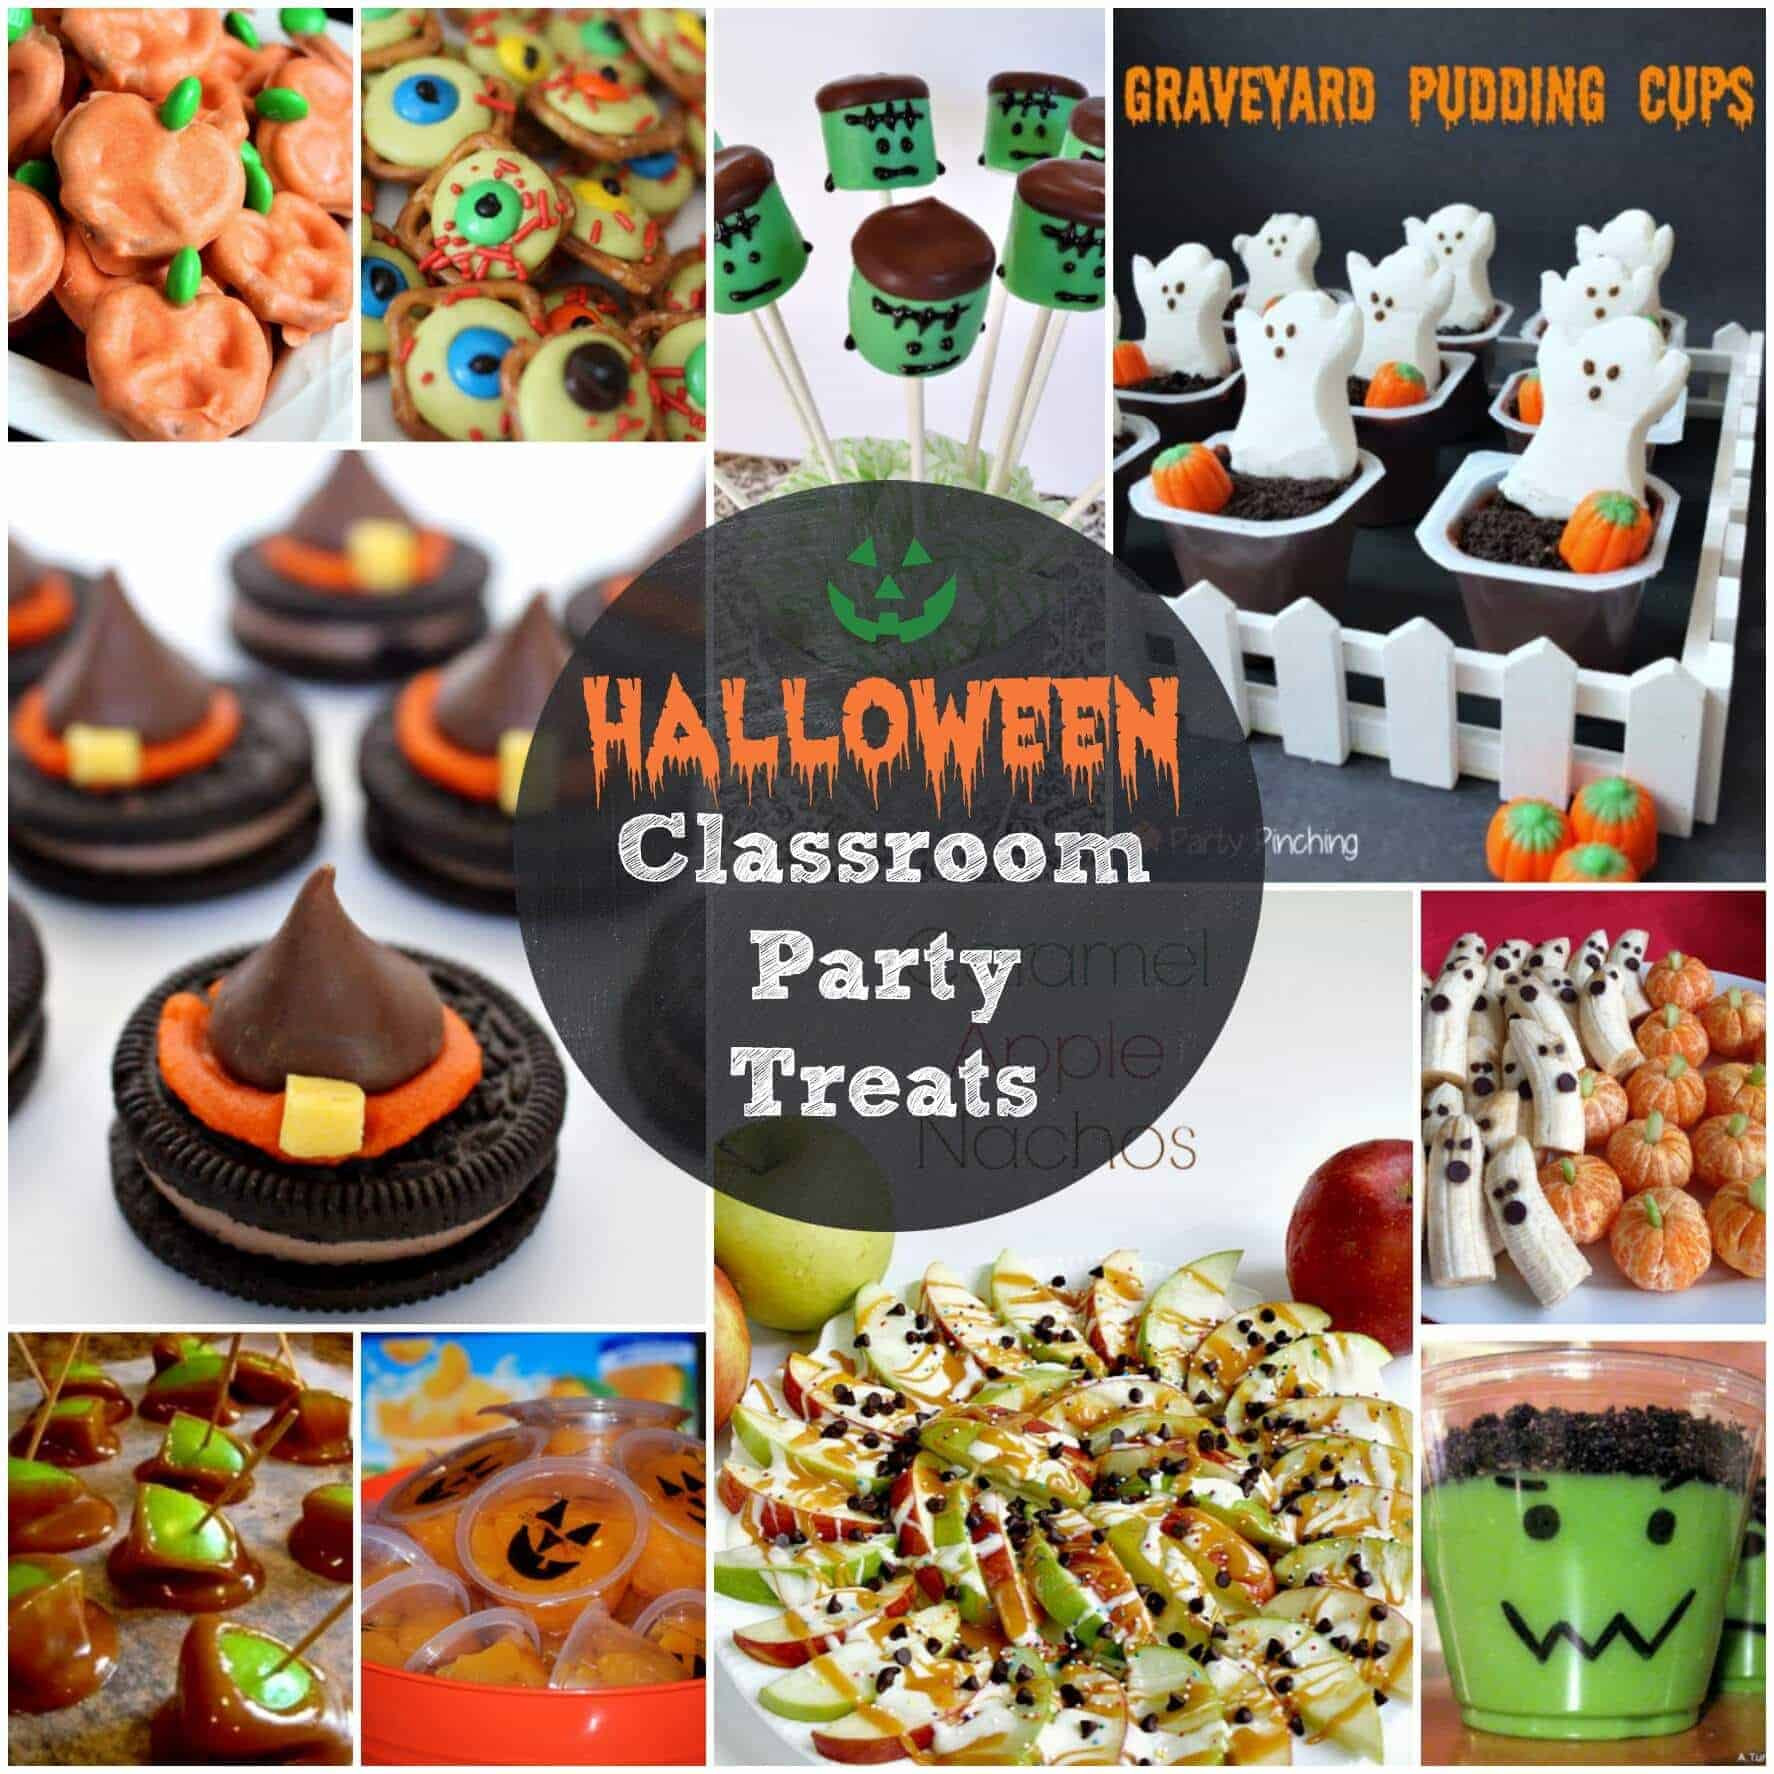 Halloween Party Ideas For School Classrooms
 Fun Halloween Ideas for Kids Page 2 of 2 Princess